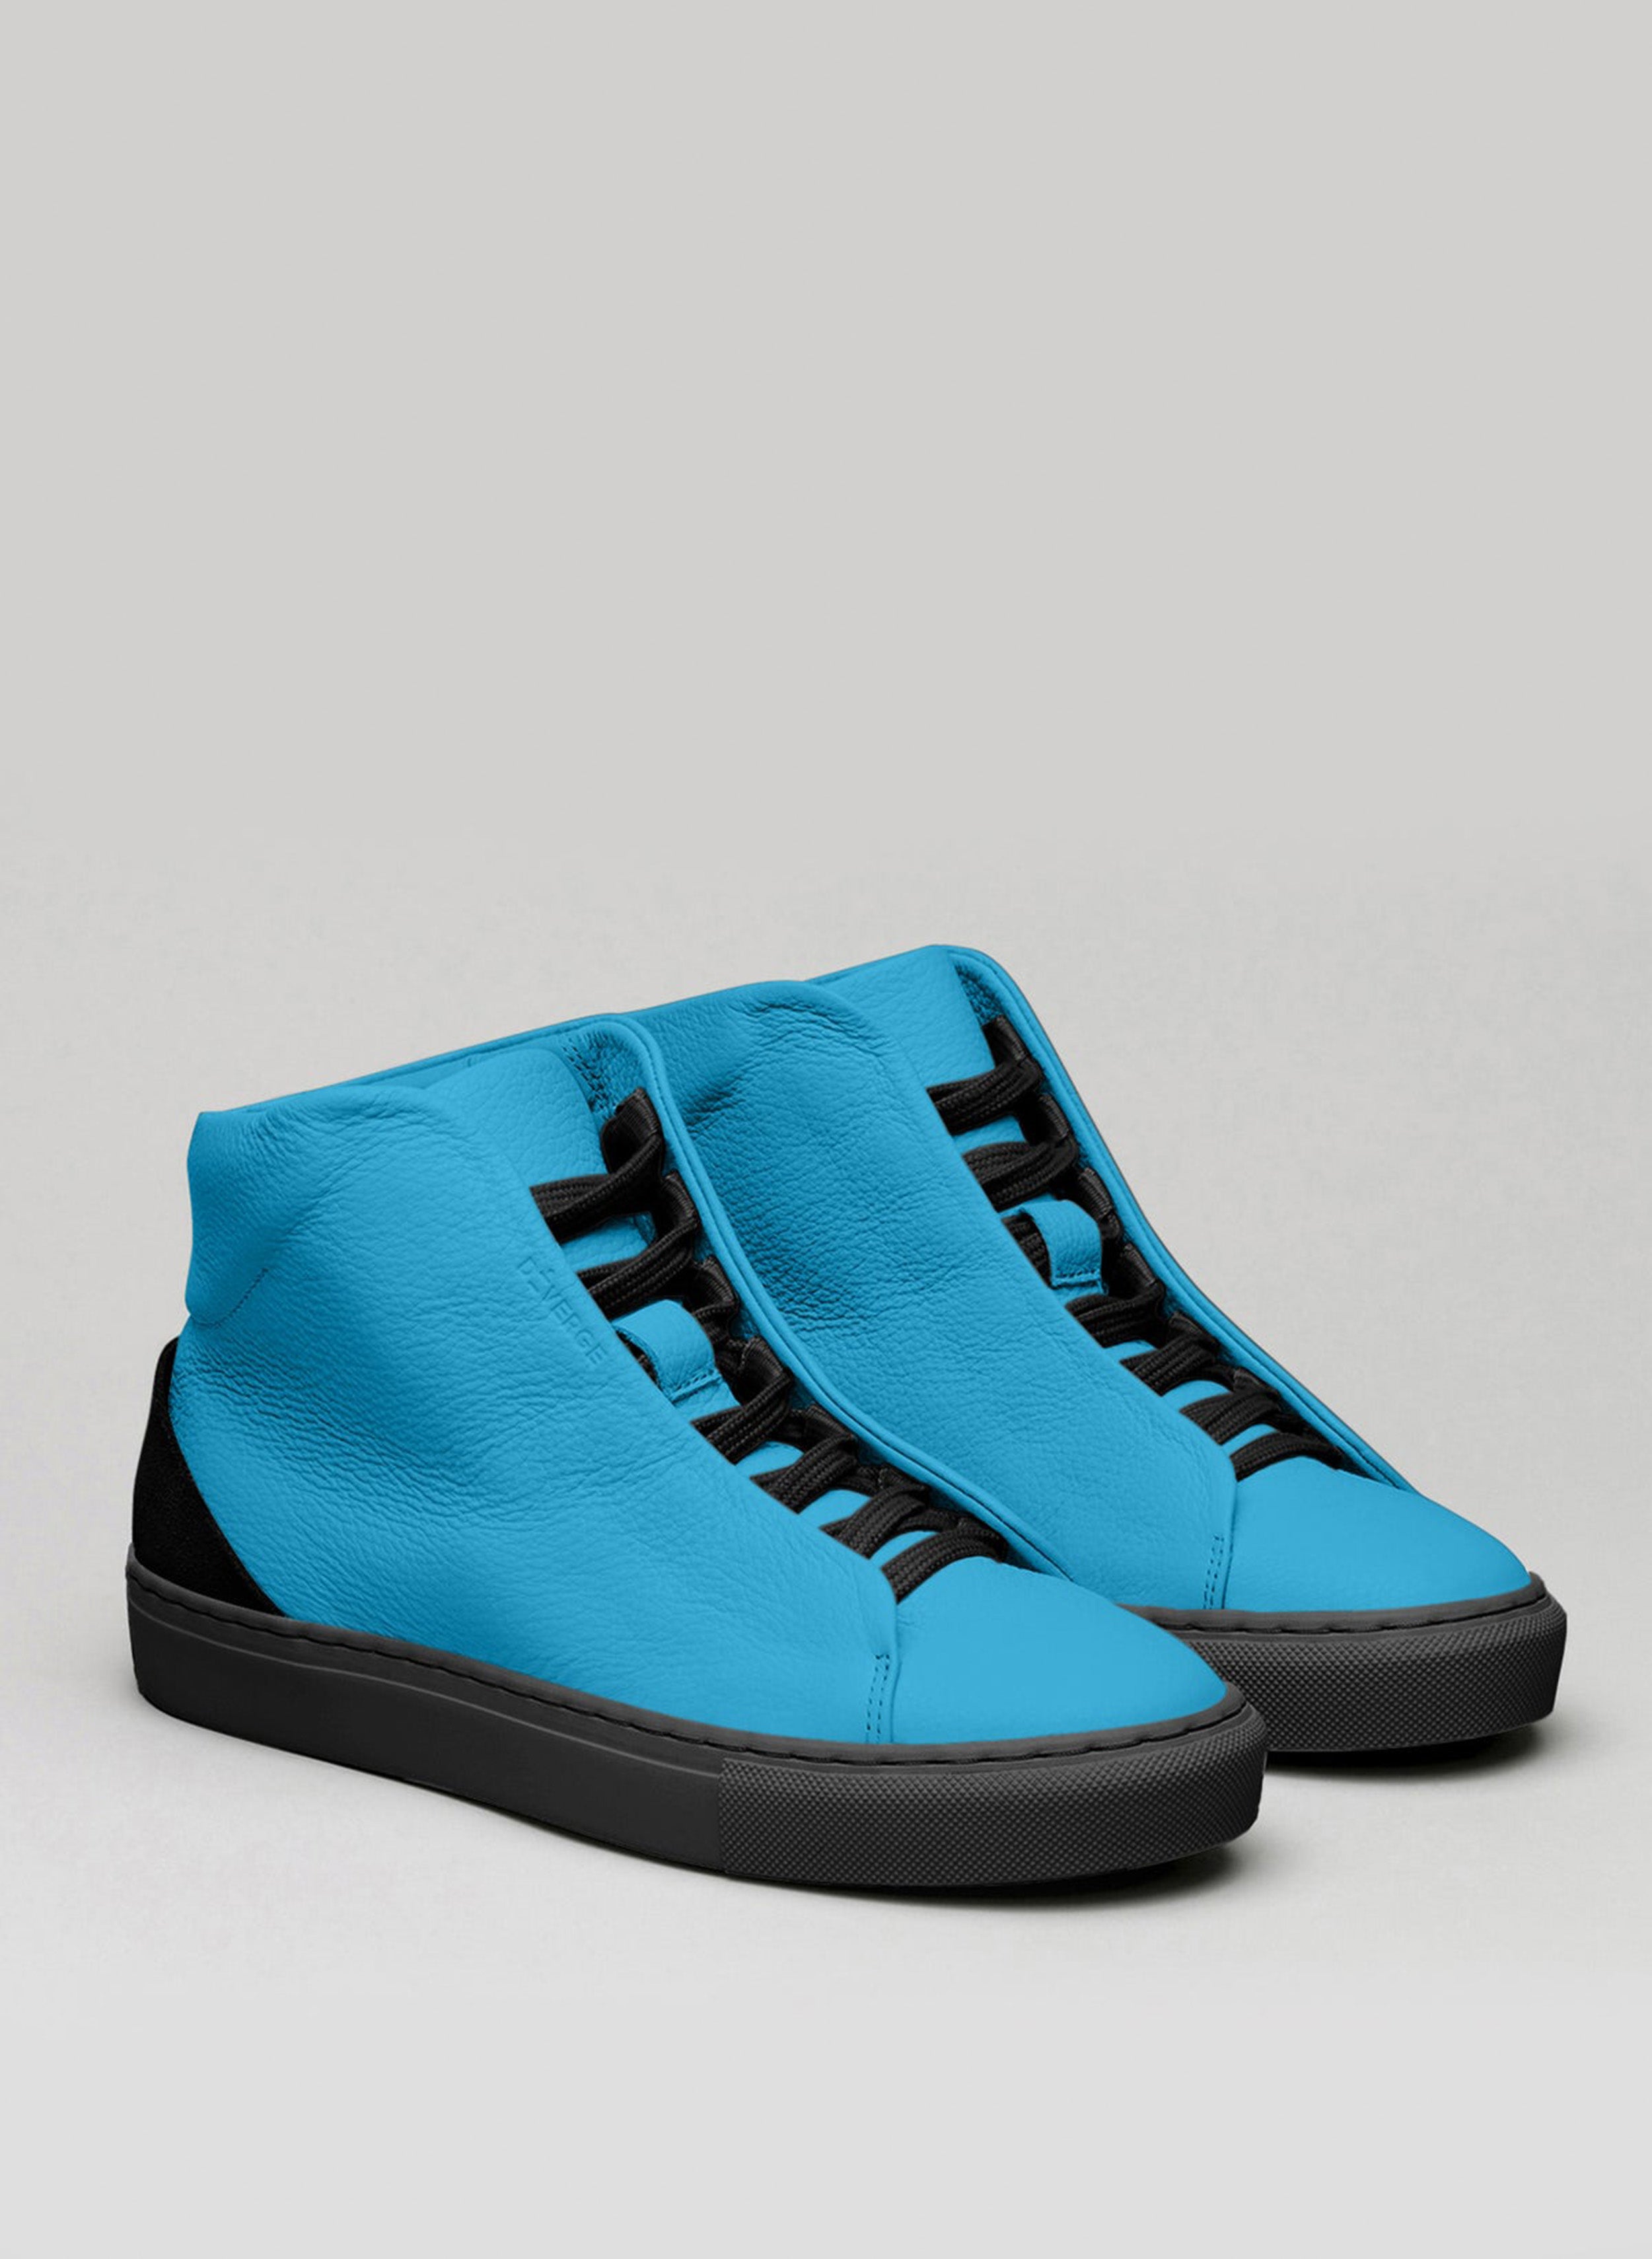 A pair of blue high top sneakers with black laces, showcasing custom shoes by Diverge.